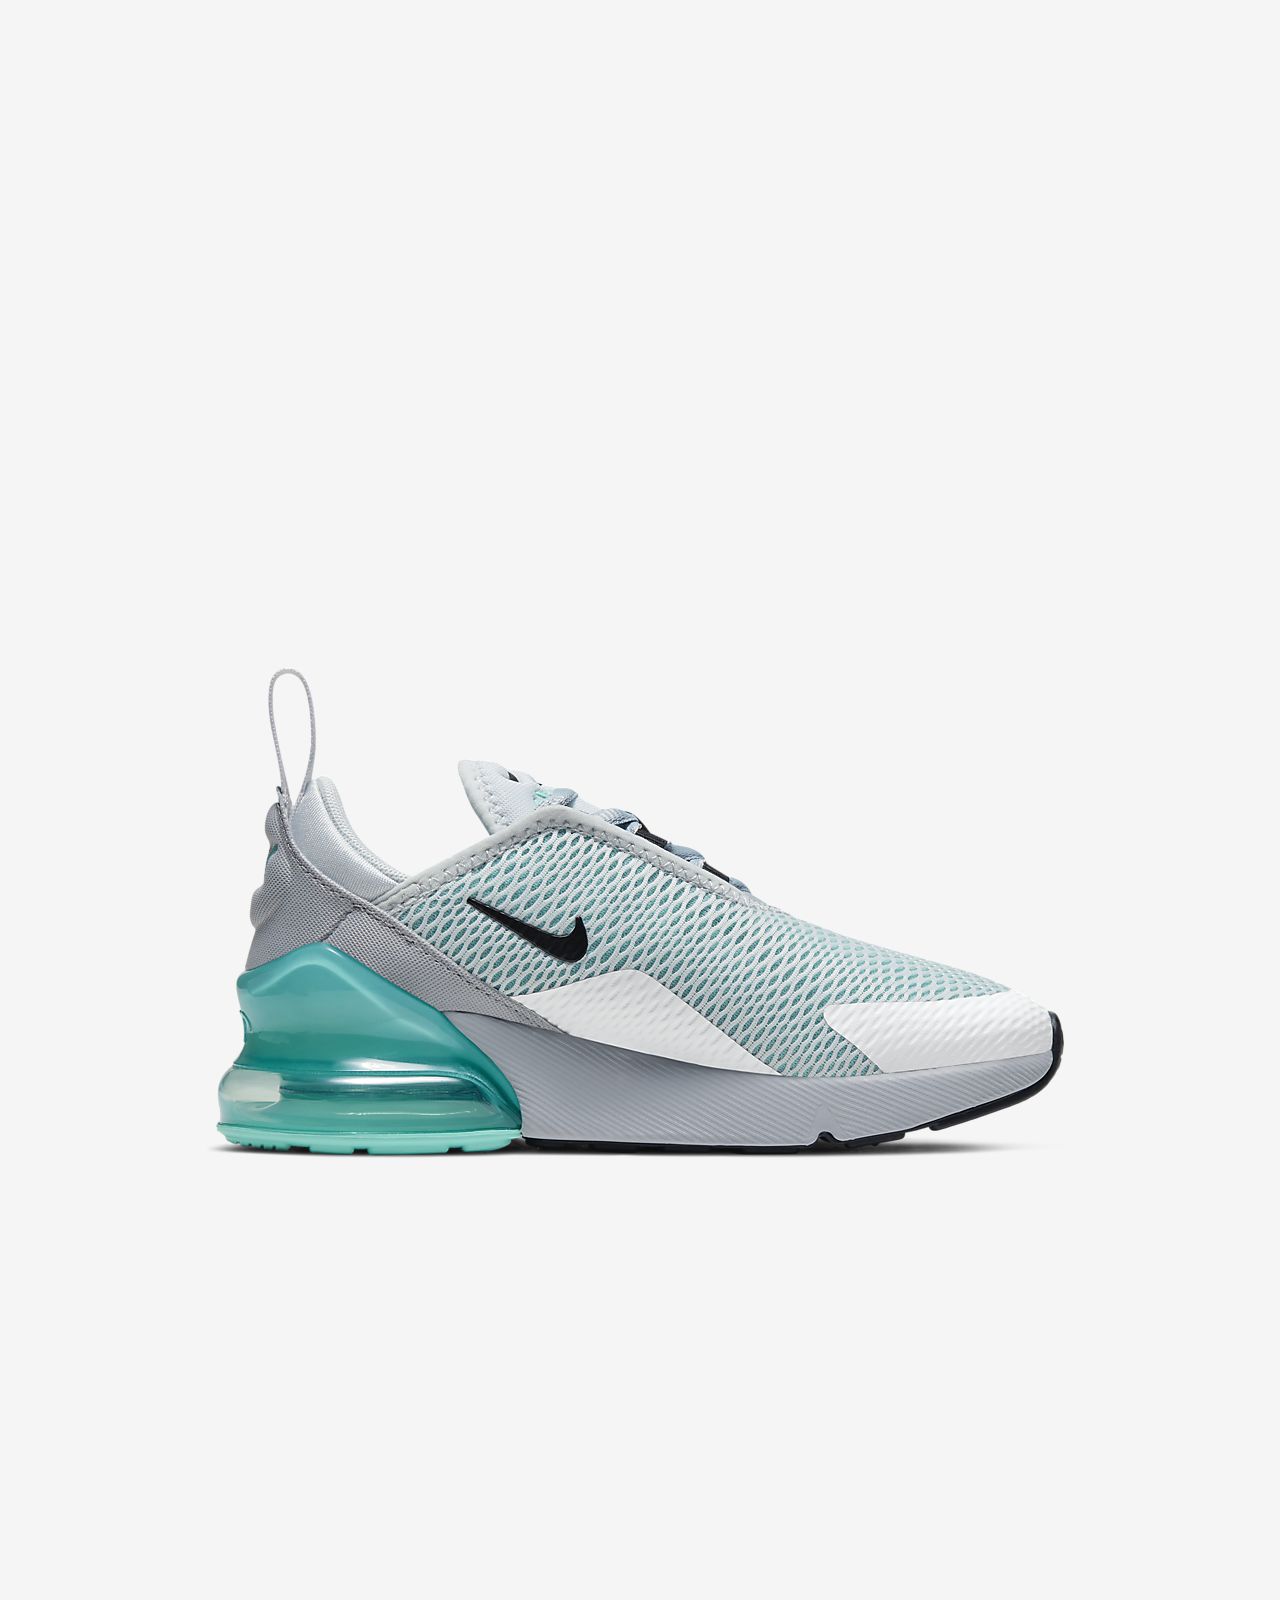 air 270 turquoise